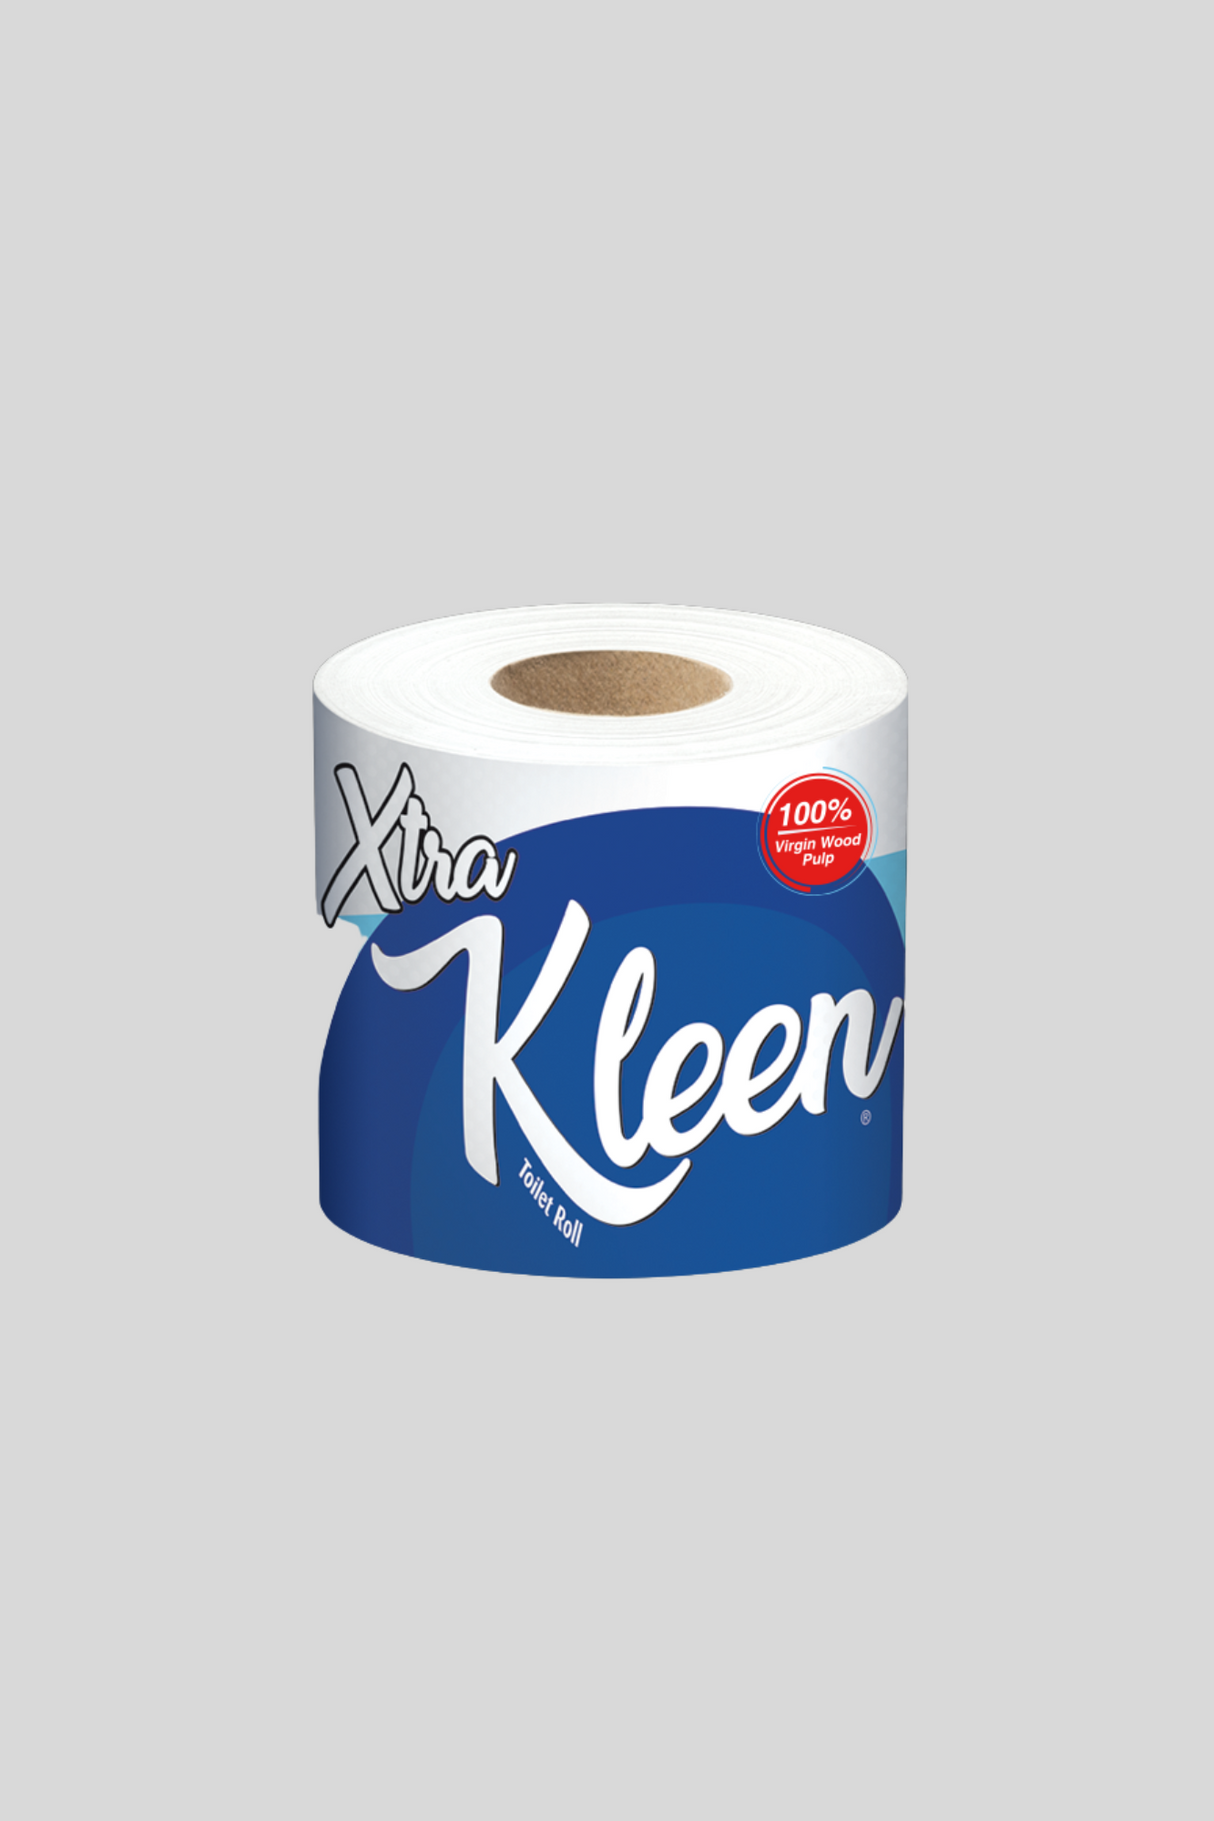 xtra kleen toilet roll small 110rs